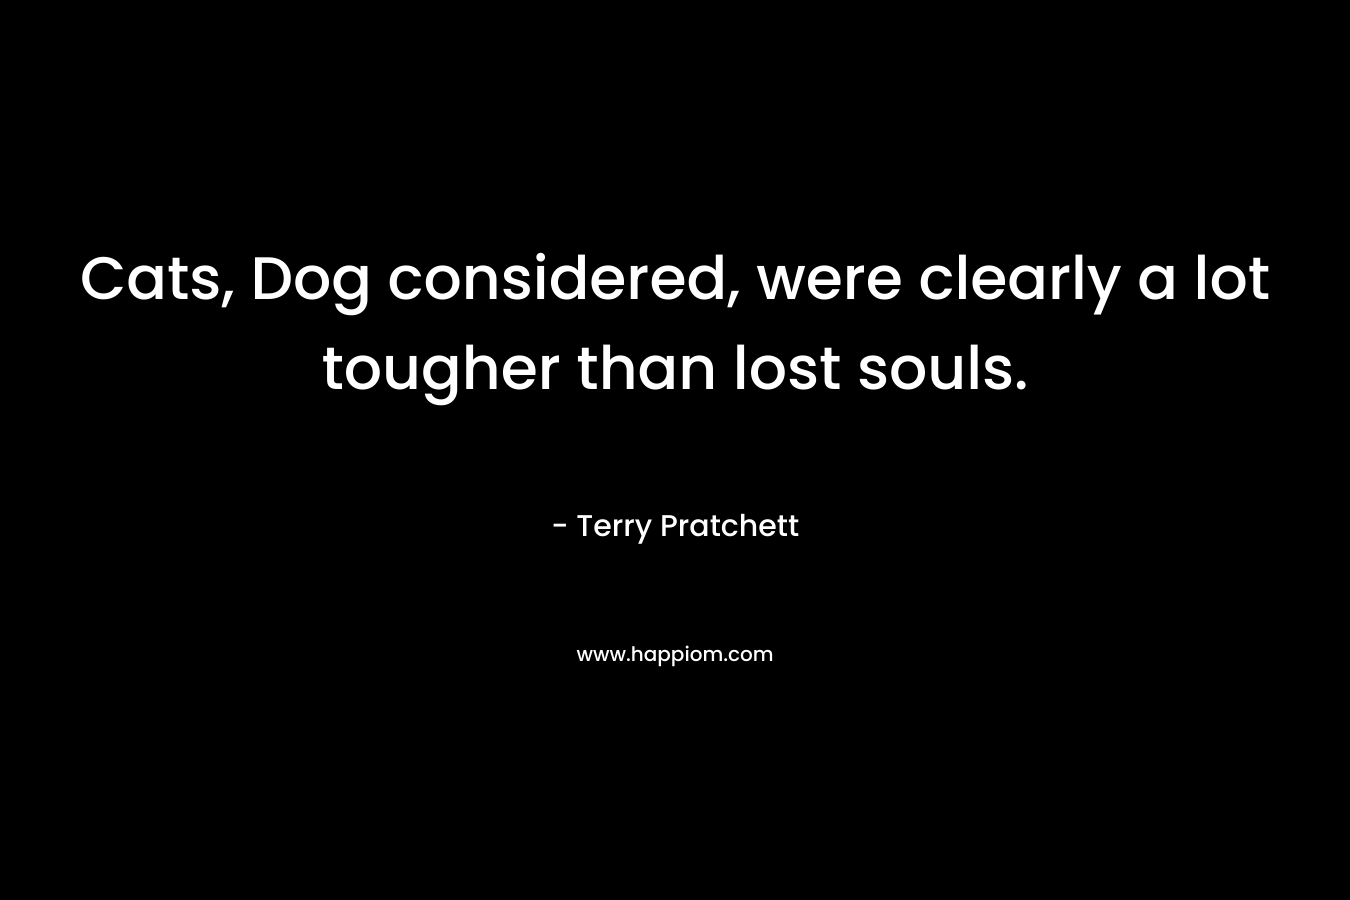 Cats, Dog considered, were clearly a lot tougher than lost souls. – Terry Pratchett